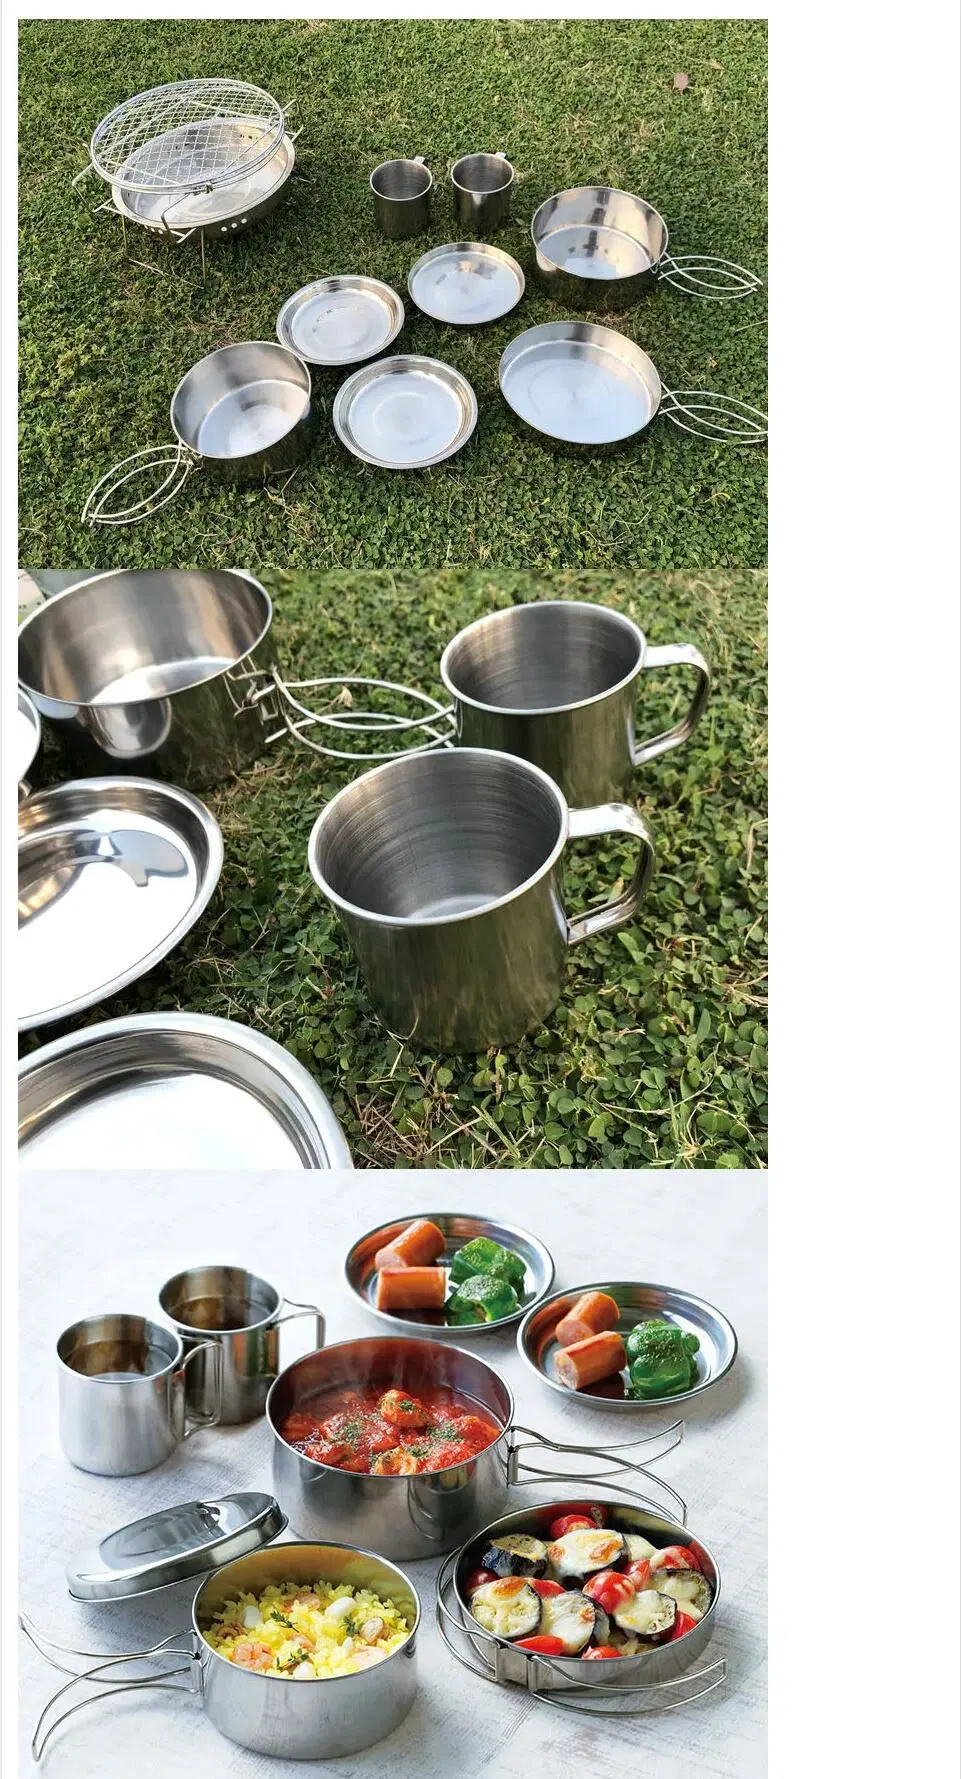 Wholesale OEM ODM Portable Camping Outdoors Stainless Steel Collapsible Tableware Cookware Set